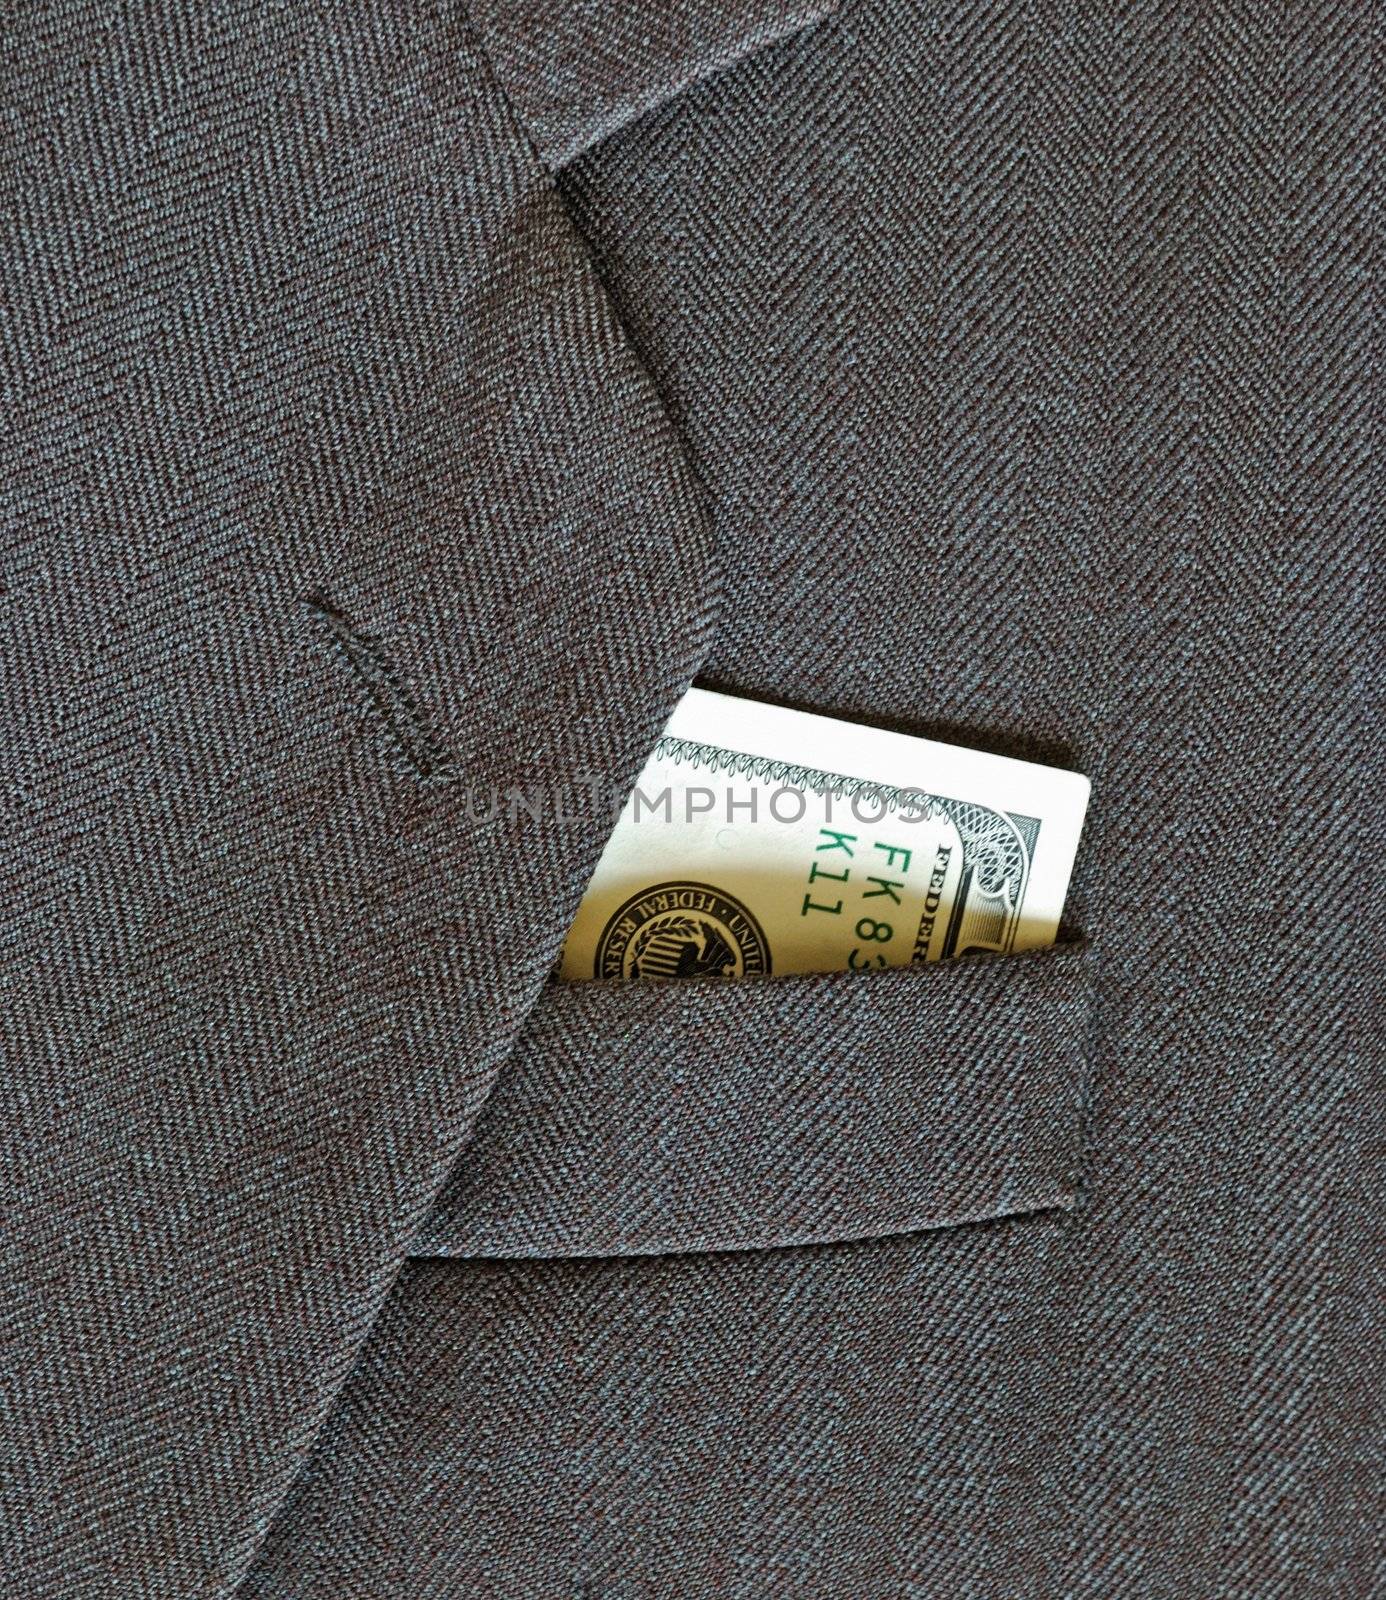 100 dollars, peeking out from the pocket of coat